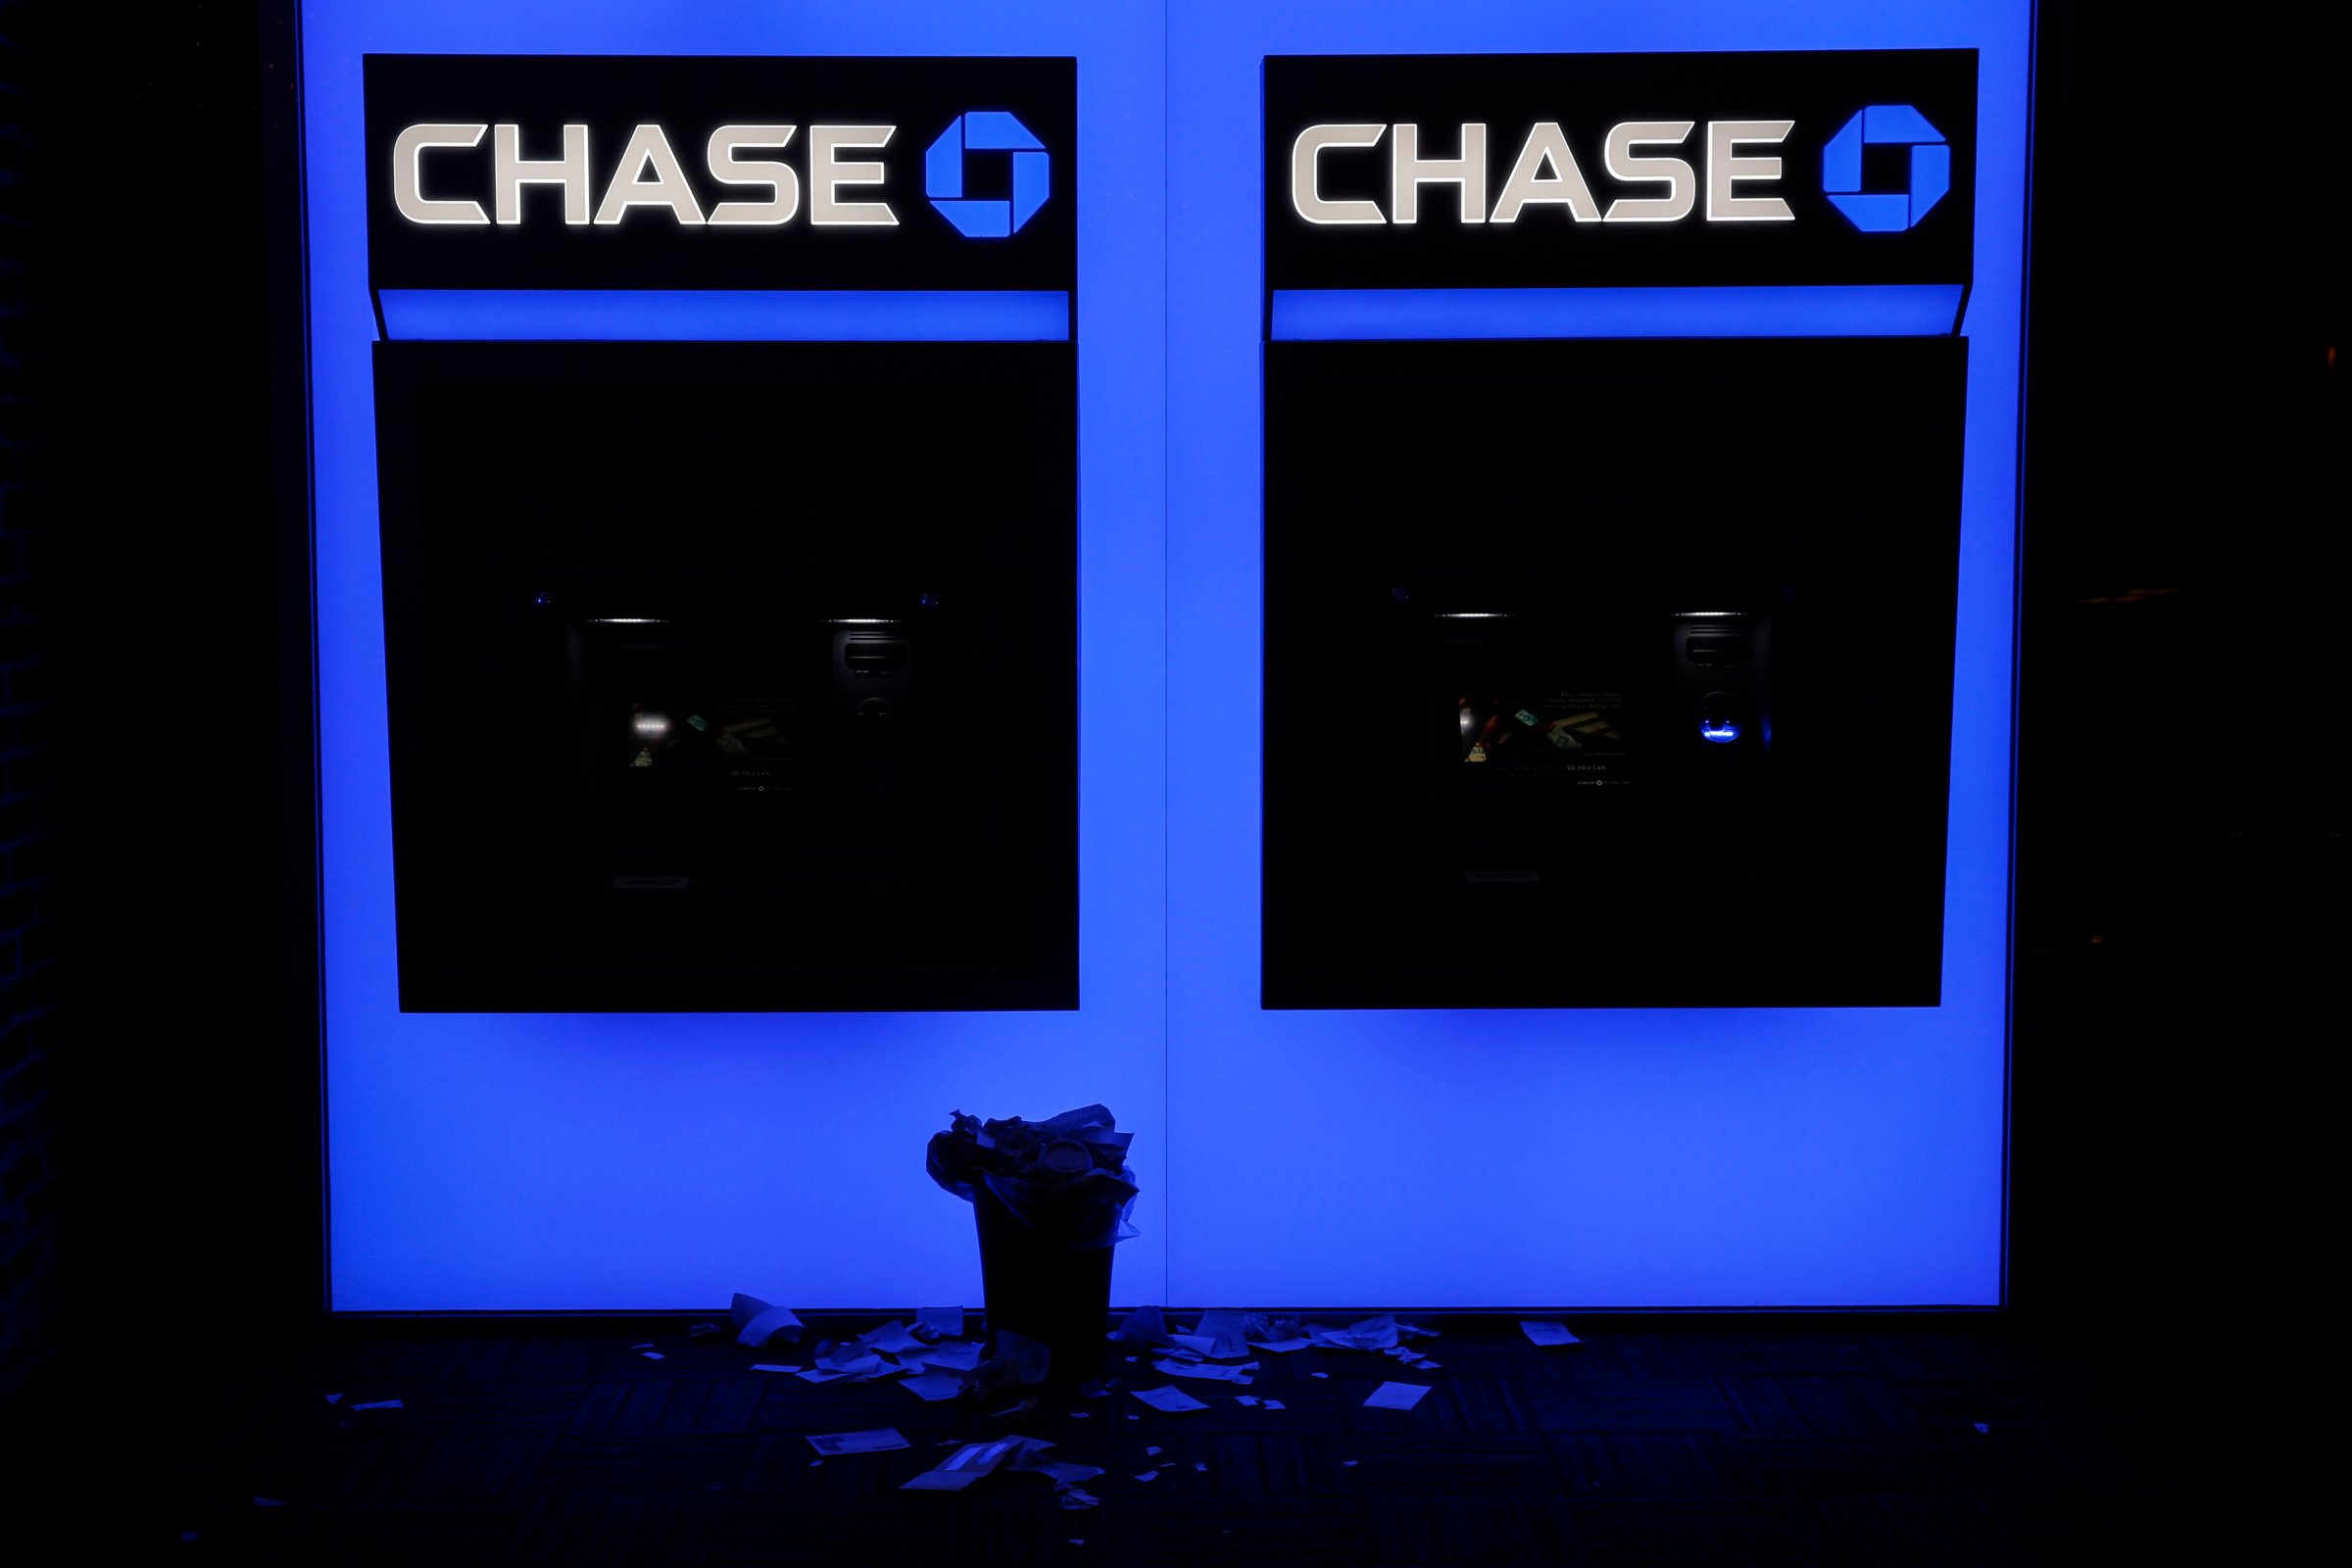 Receipts rest beneath JPMorgan Chase &amp; Co. bank ATMs in San Diego, California, U.S., on Wednesday, July 8, 2015.